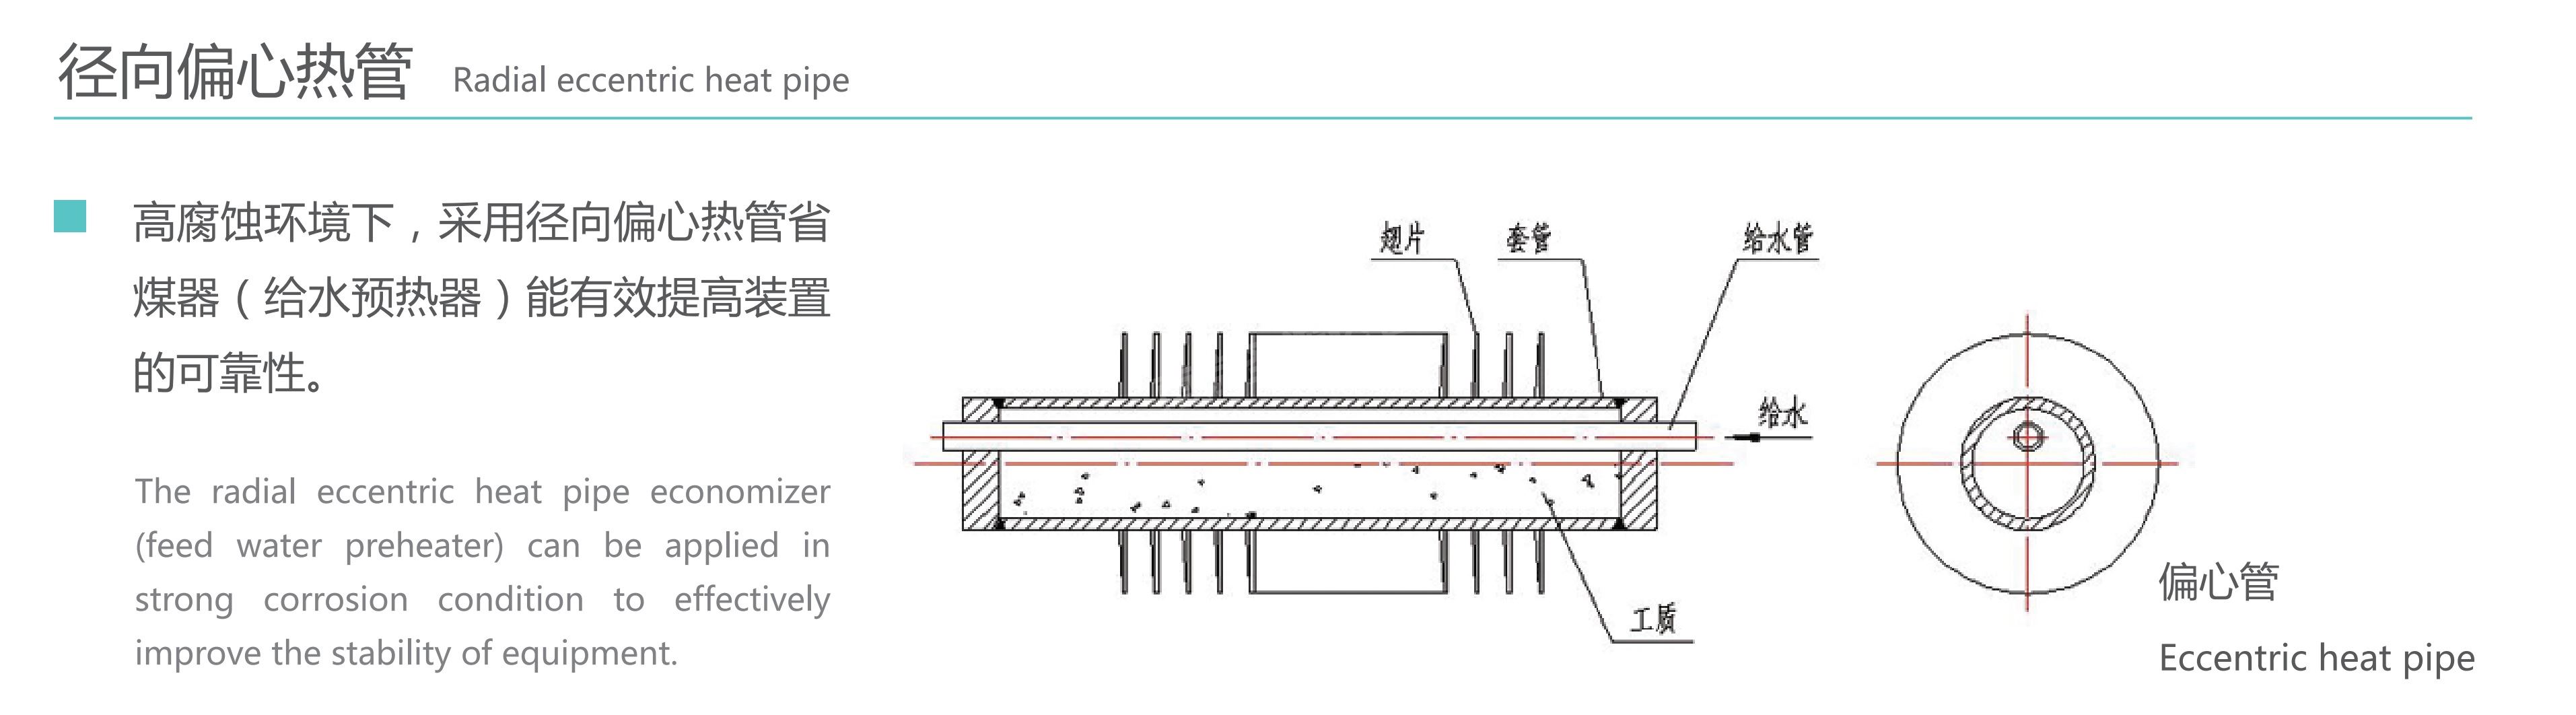 Radial eccentric heat pipes